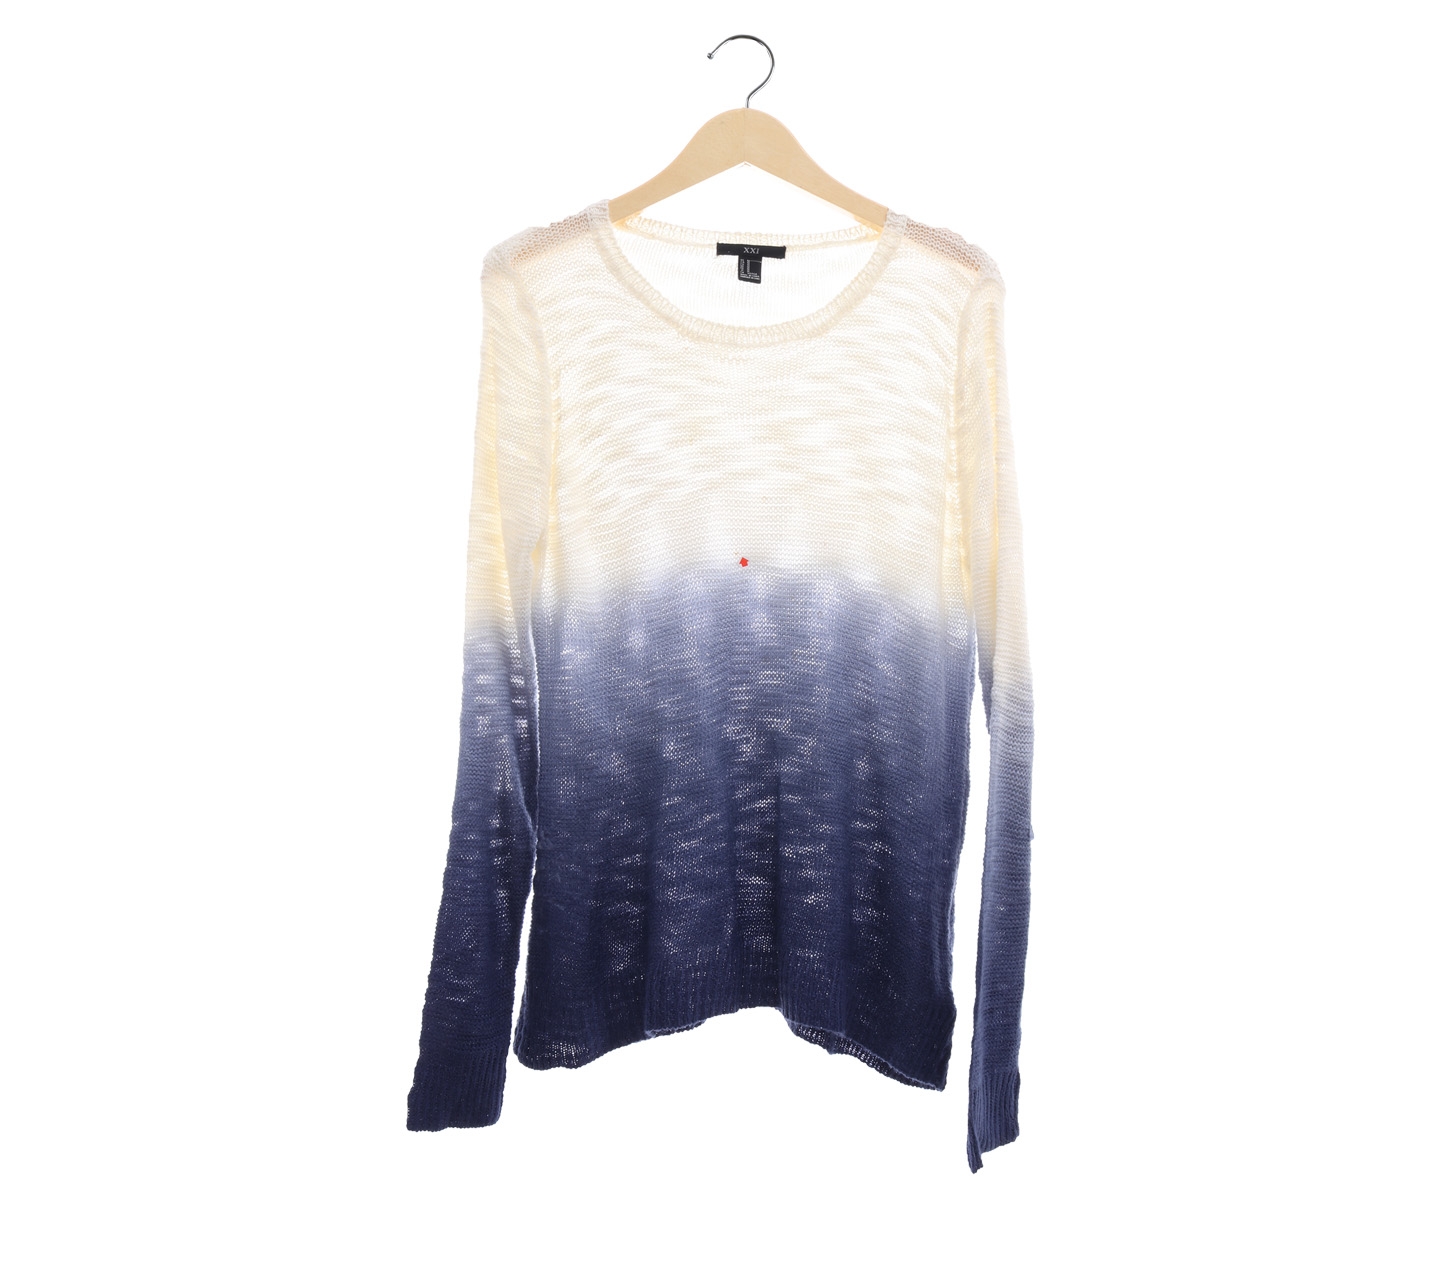 Forever 21 Cream & Blue Knit Sweater